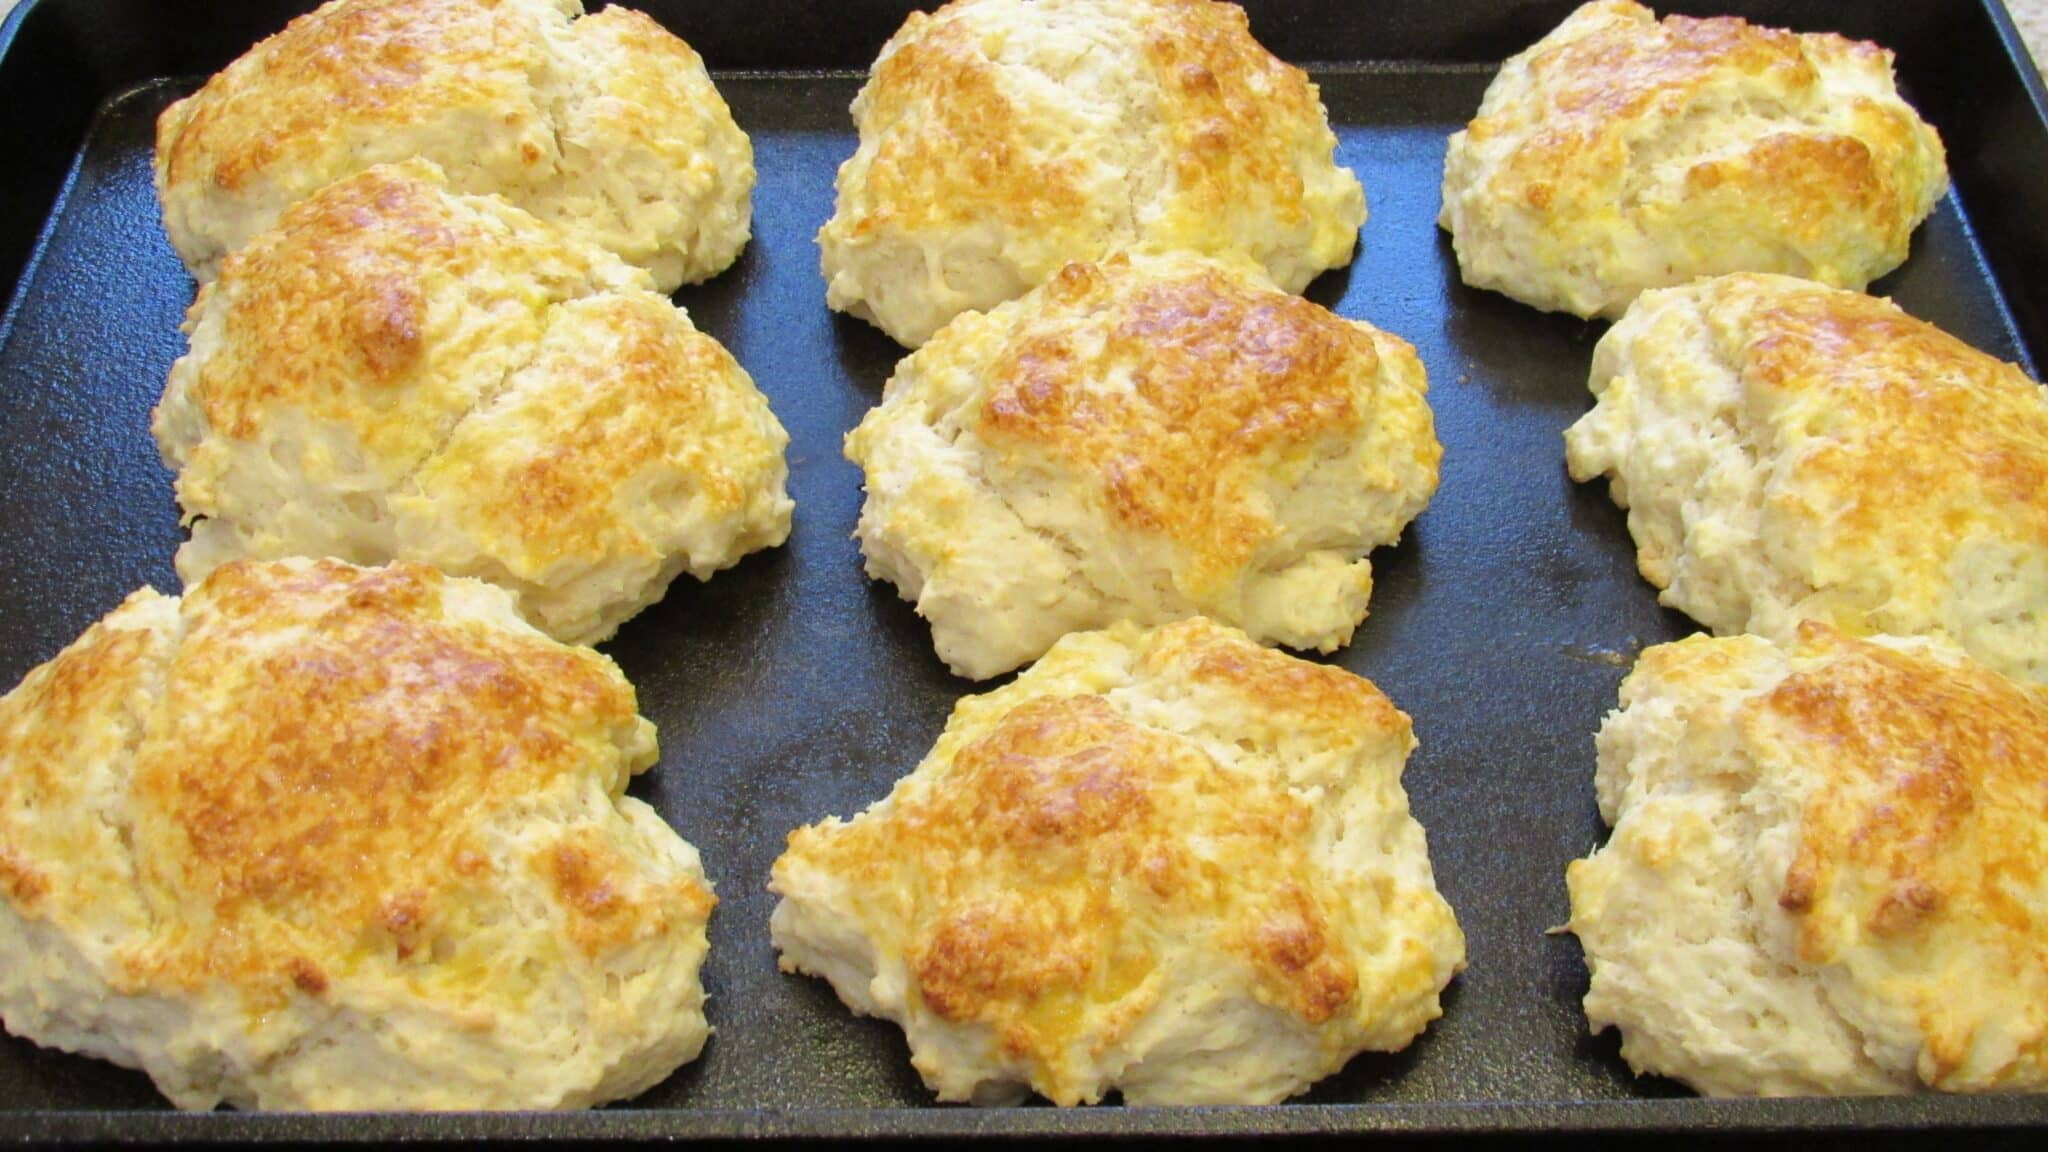 Nine pieces of biscuits without milk  were baked on a cast-iron sheet pan.